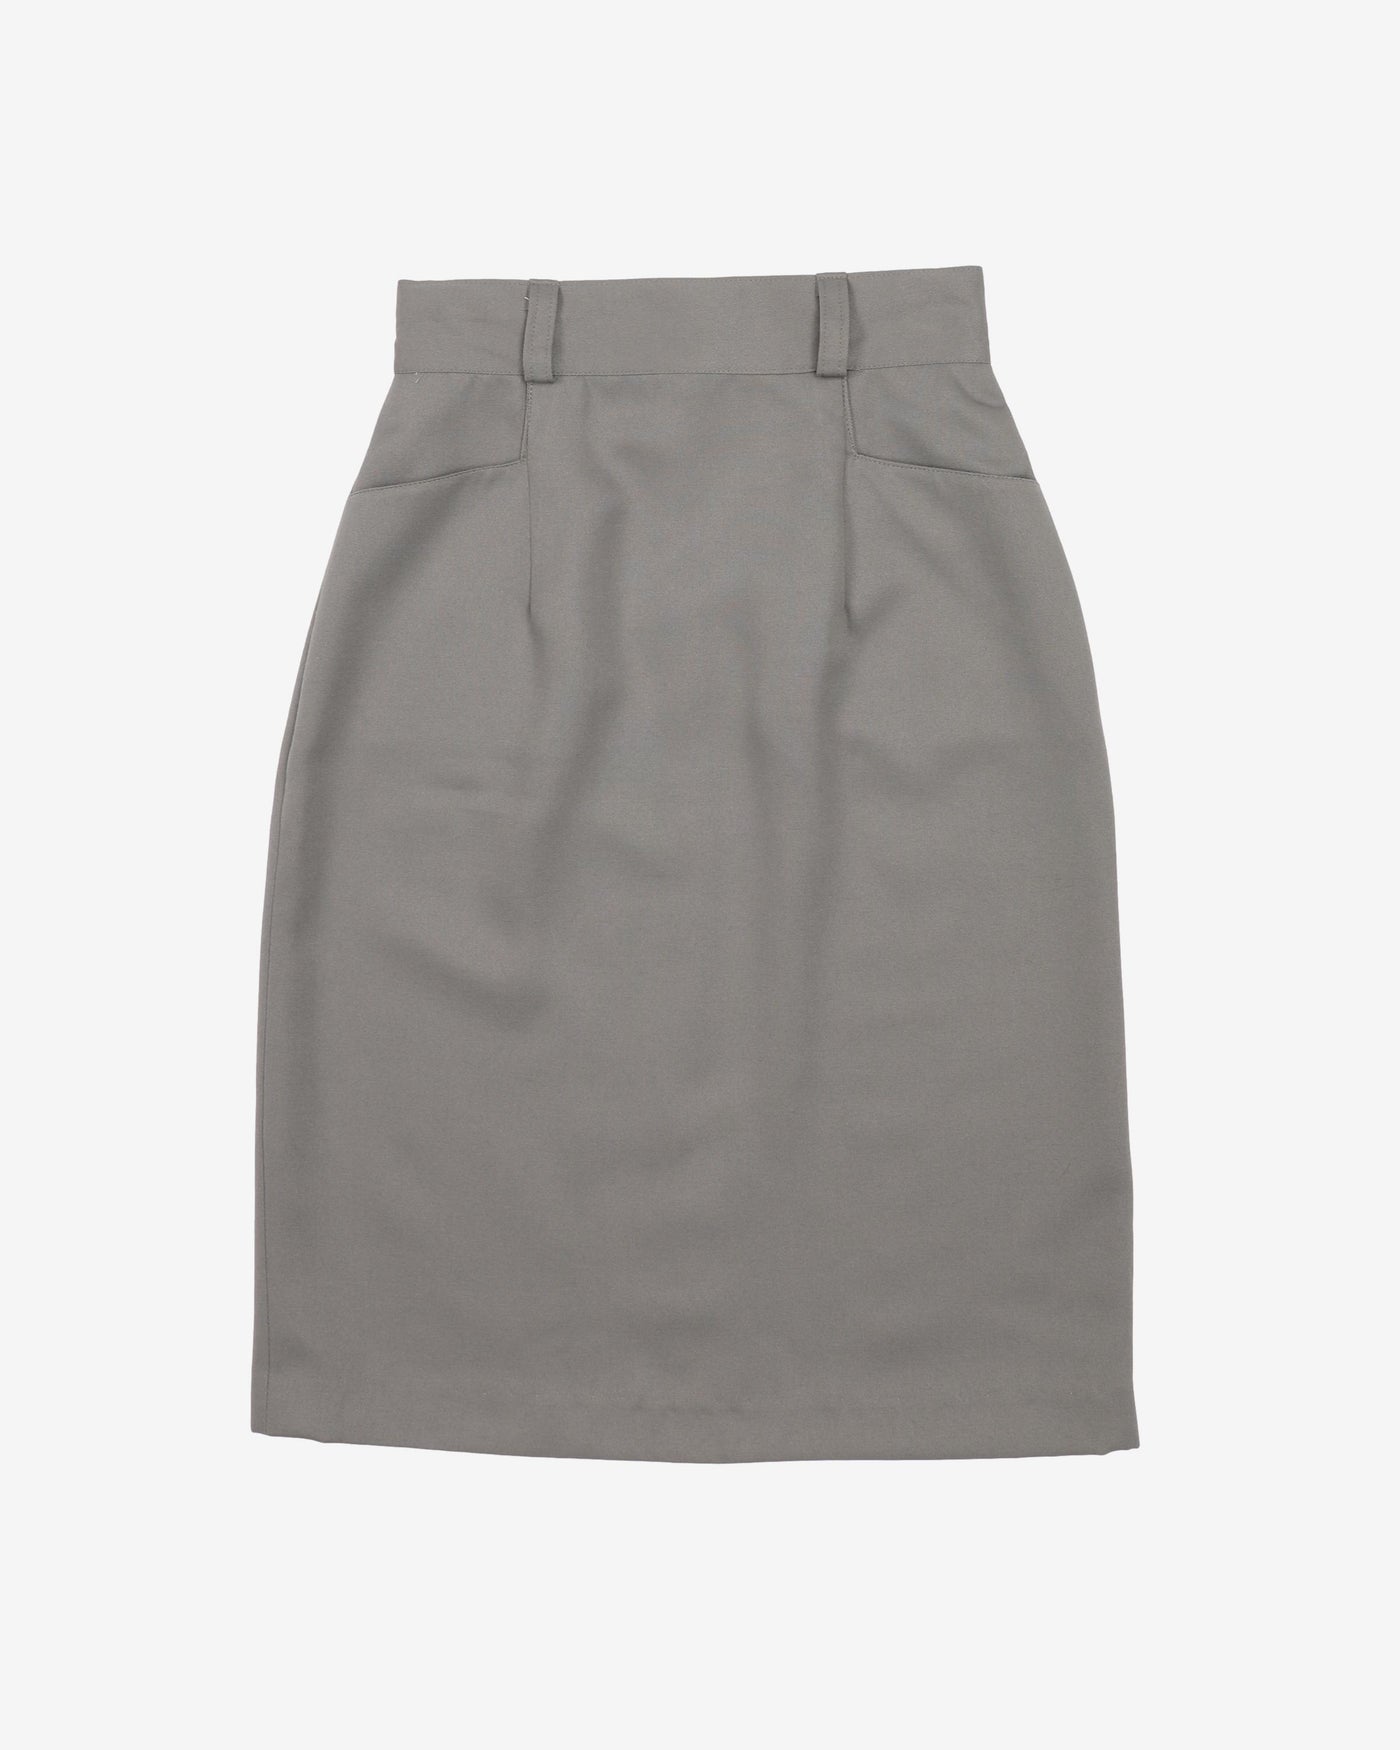 1990s Grey With Pockets Pencil Skirt - XS